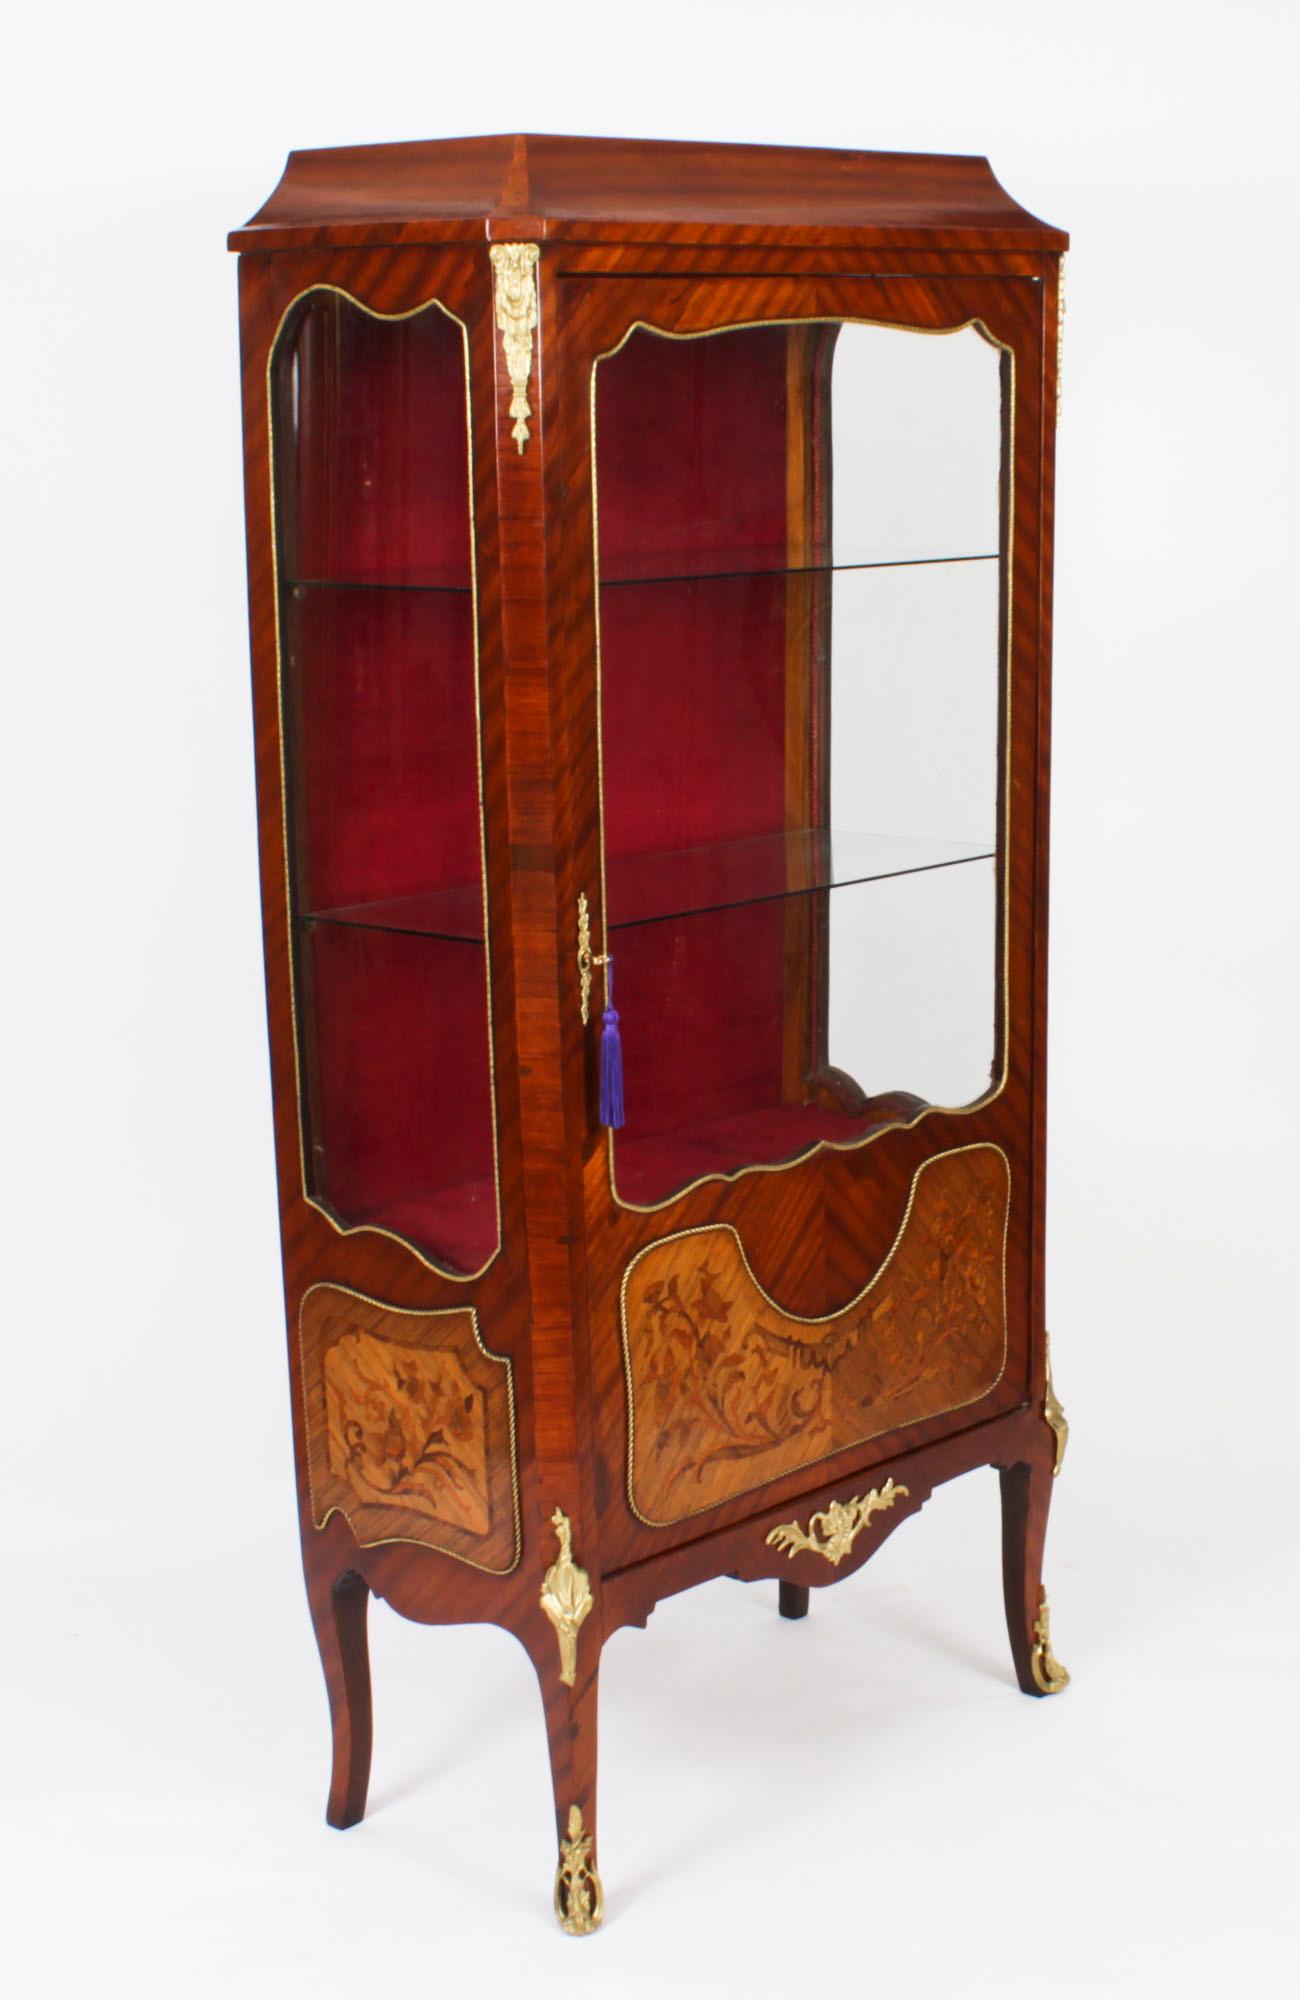 This is a stunning antique French Louis Revival ormolu mounted walnut and marquetry inlaid display cabinet, circa 1920 in date.

The cabinet features a shaped top and has impressive and ornate ormolu mounts. The body is rectangular shaped with a